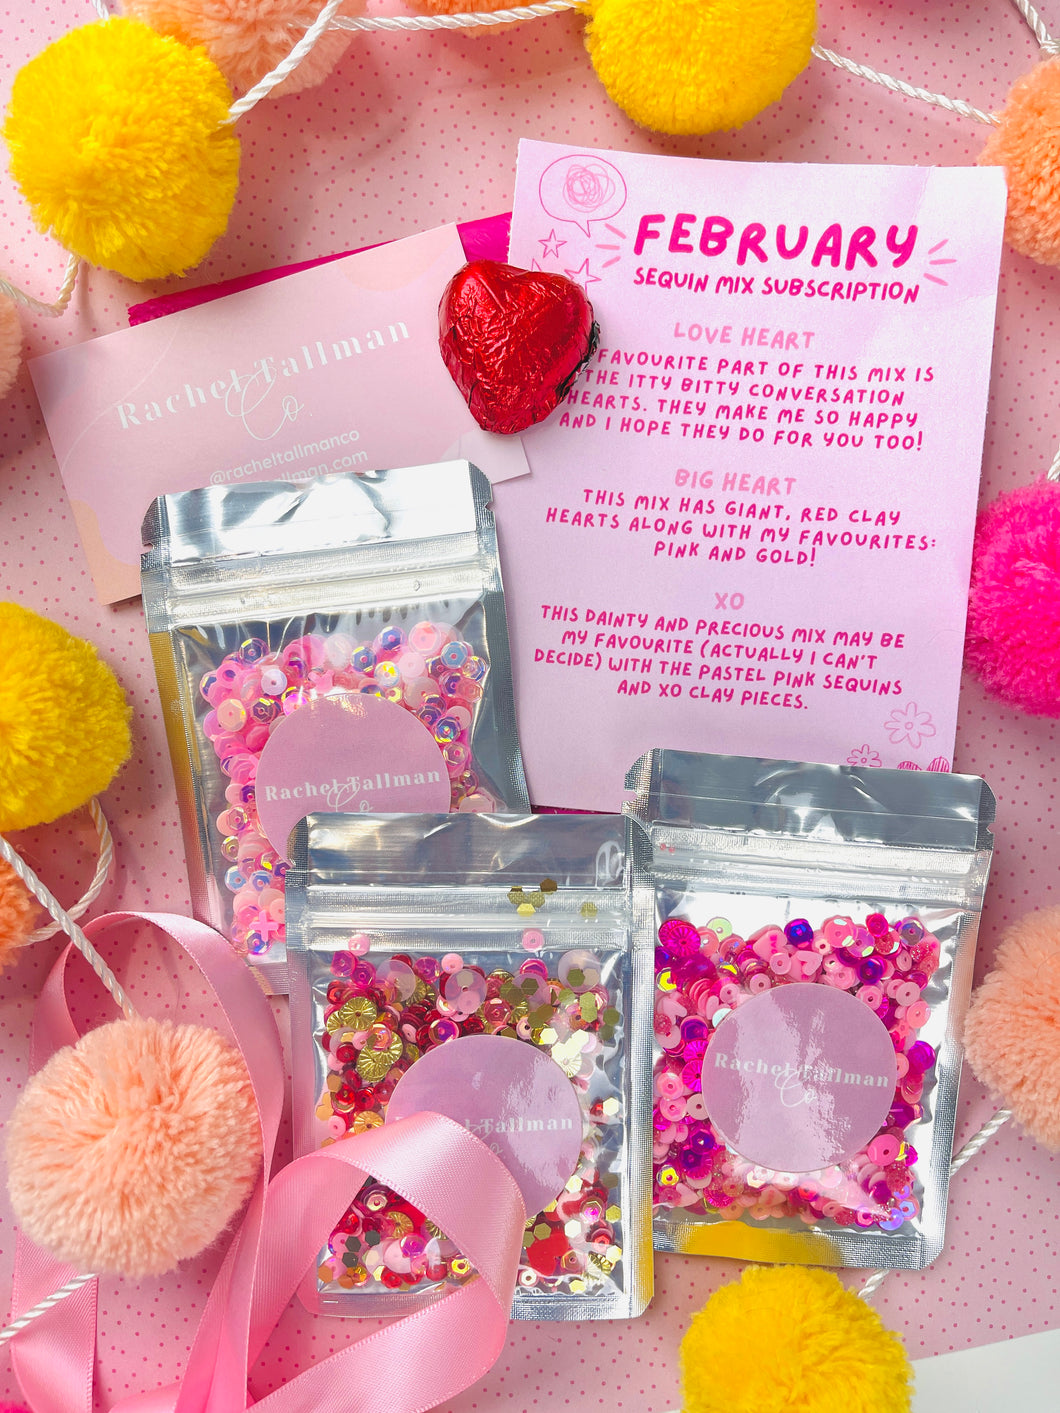 Monthly Sequin Mix Subscription